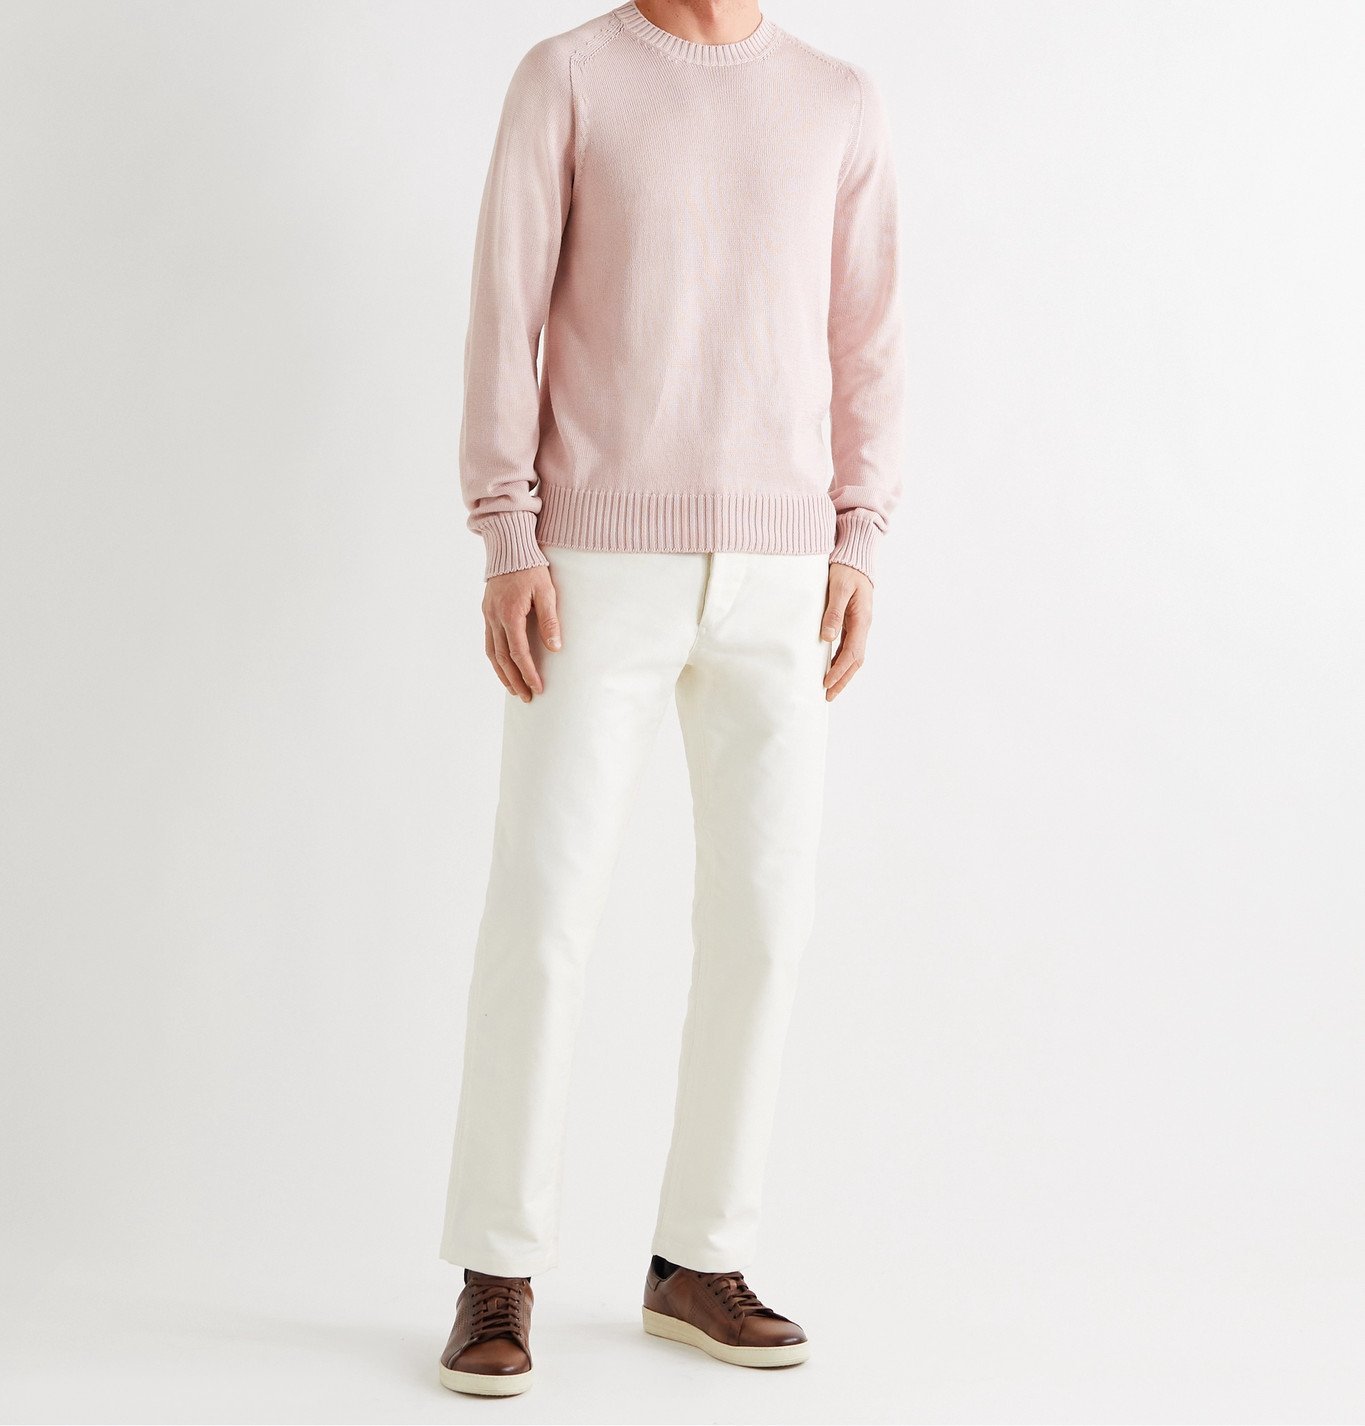 TOM FORD - Cotton and Silk-Blend Sweater - Pink TOM FORD